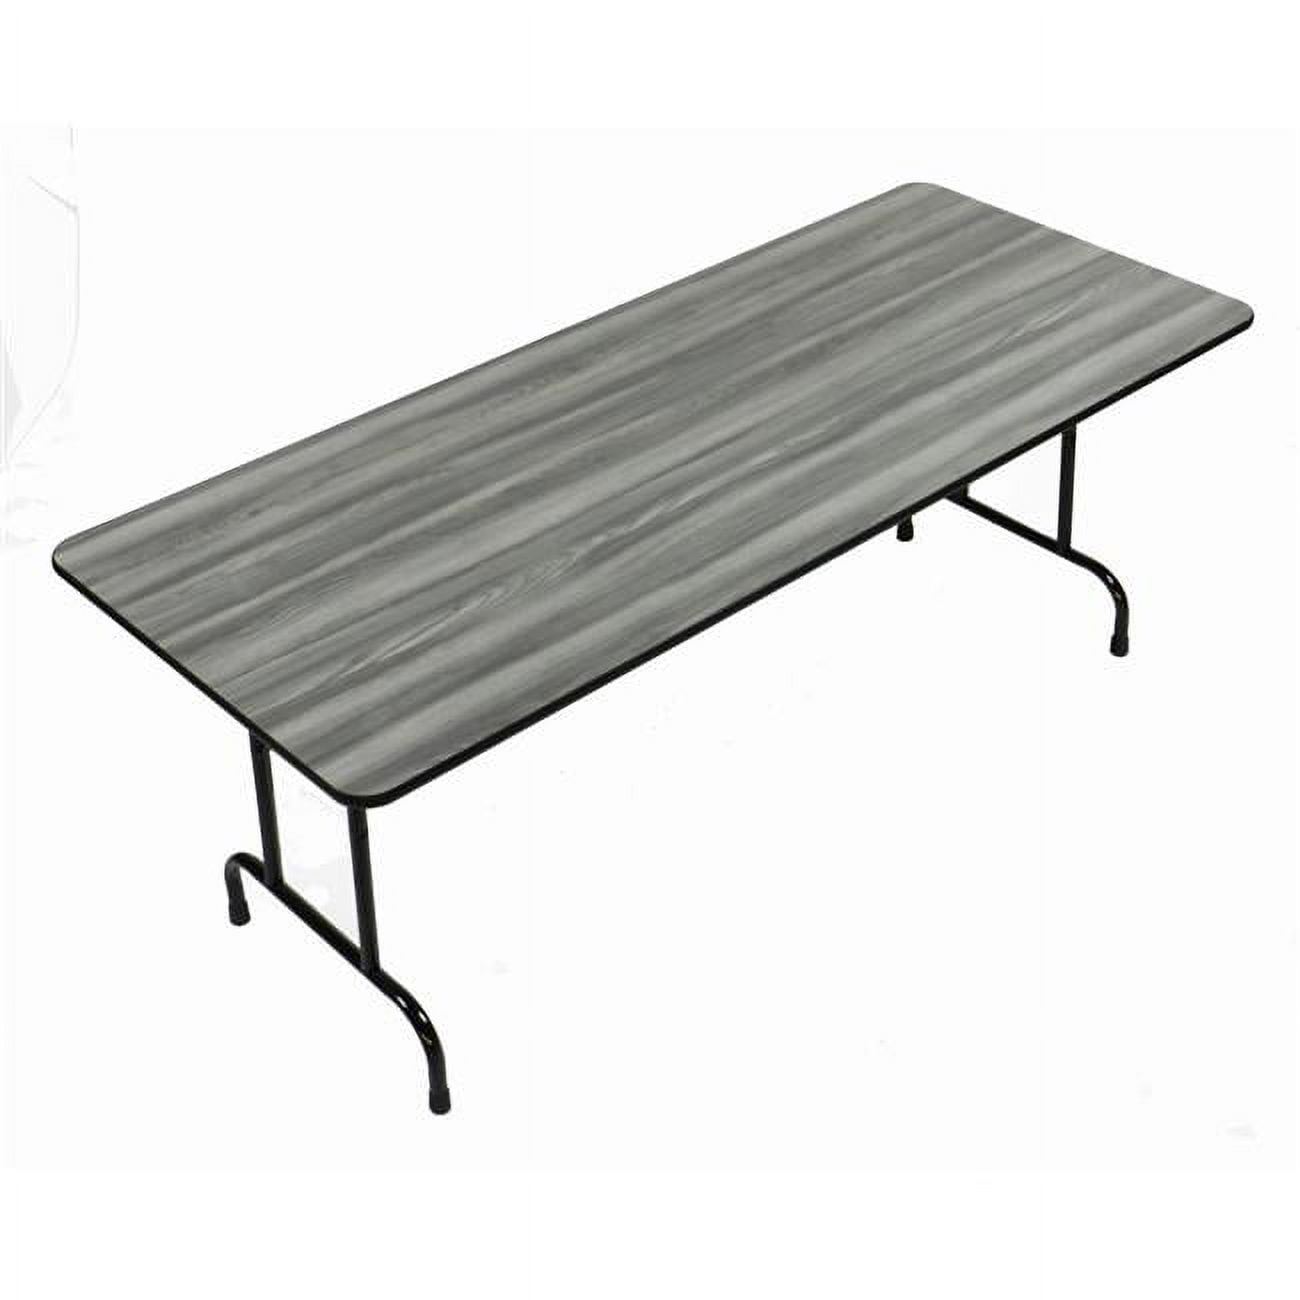 Cf2448px-52 0.75 In. High Pressure Rectangular Top Folding Tables, New England Driftwood - 24 X 48 In.